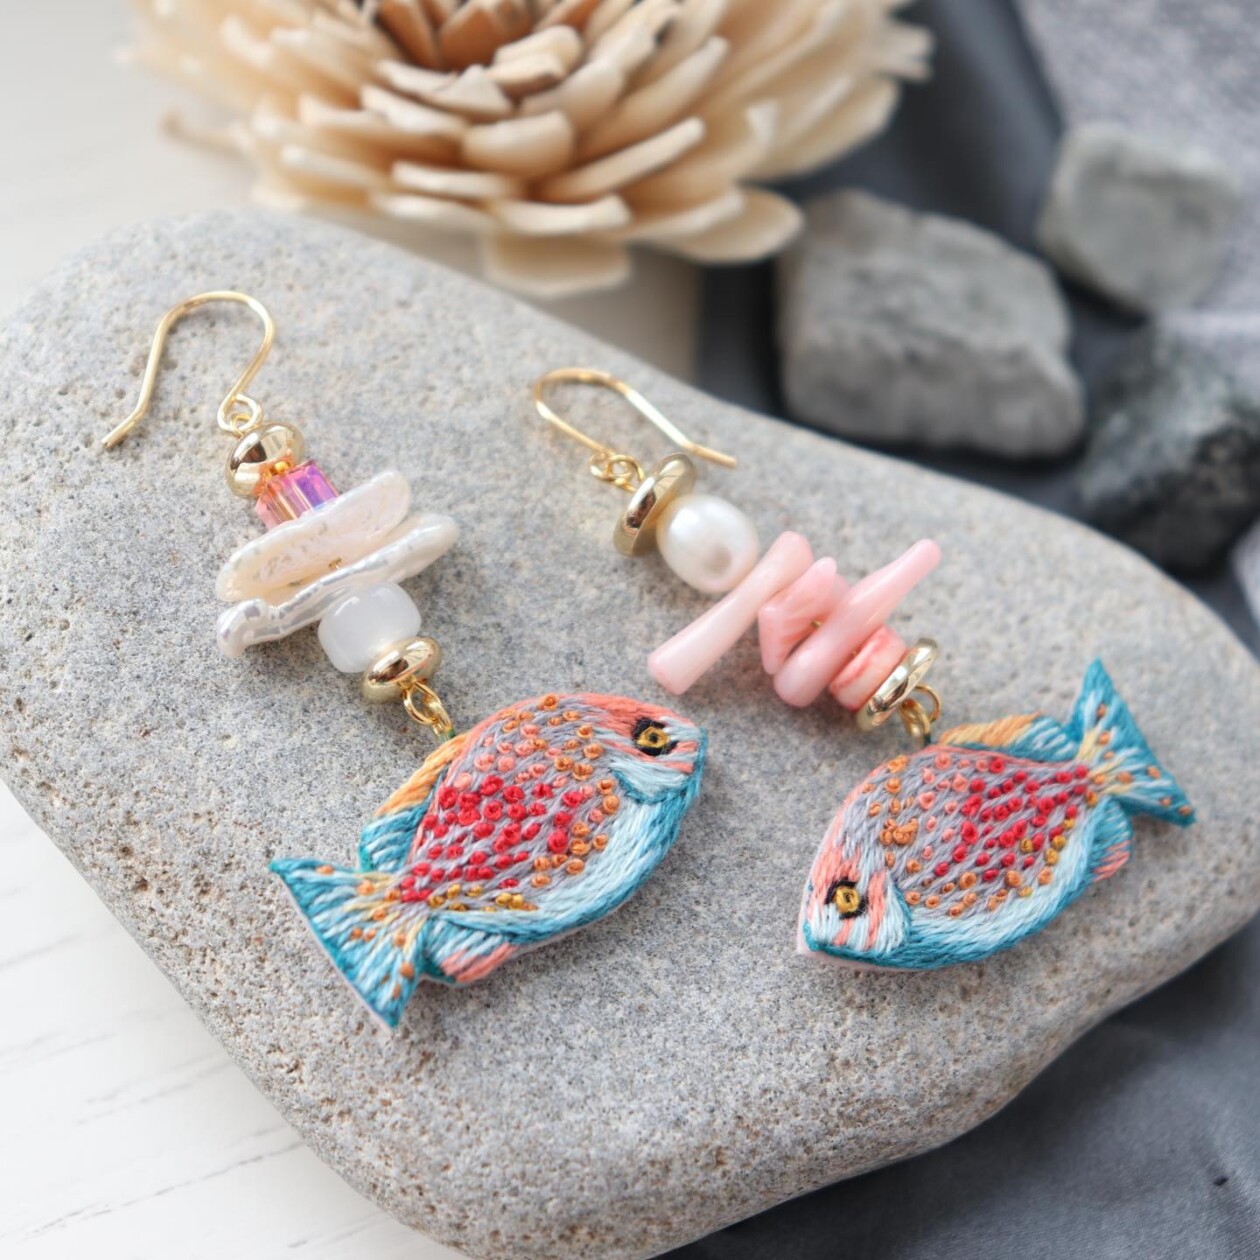 Eye Catching Handmade Embroidered Earrings By Vivaembr (14)